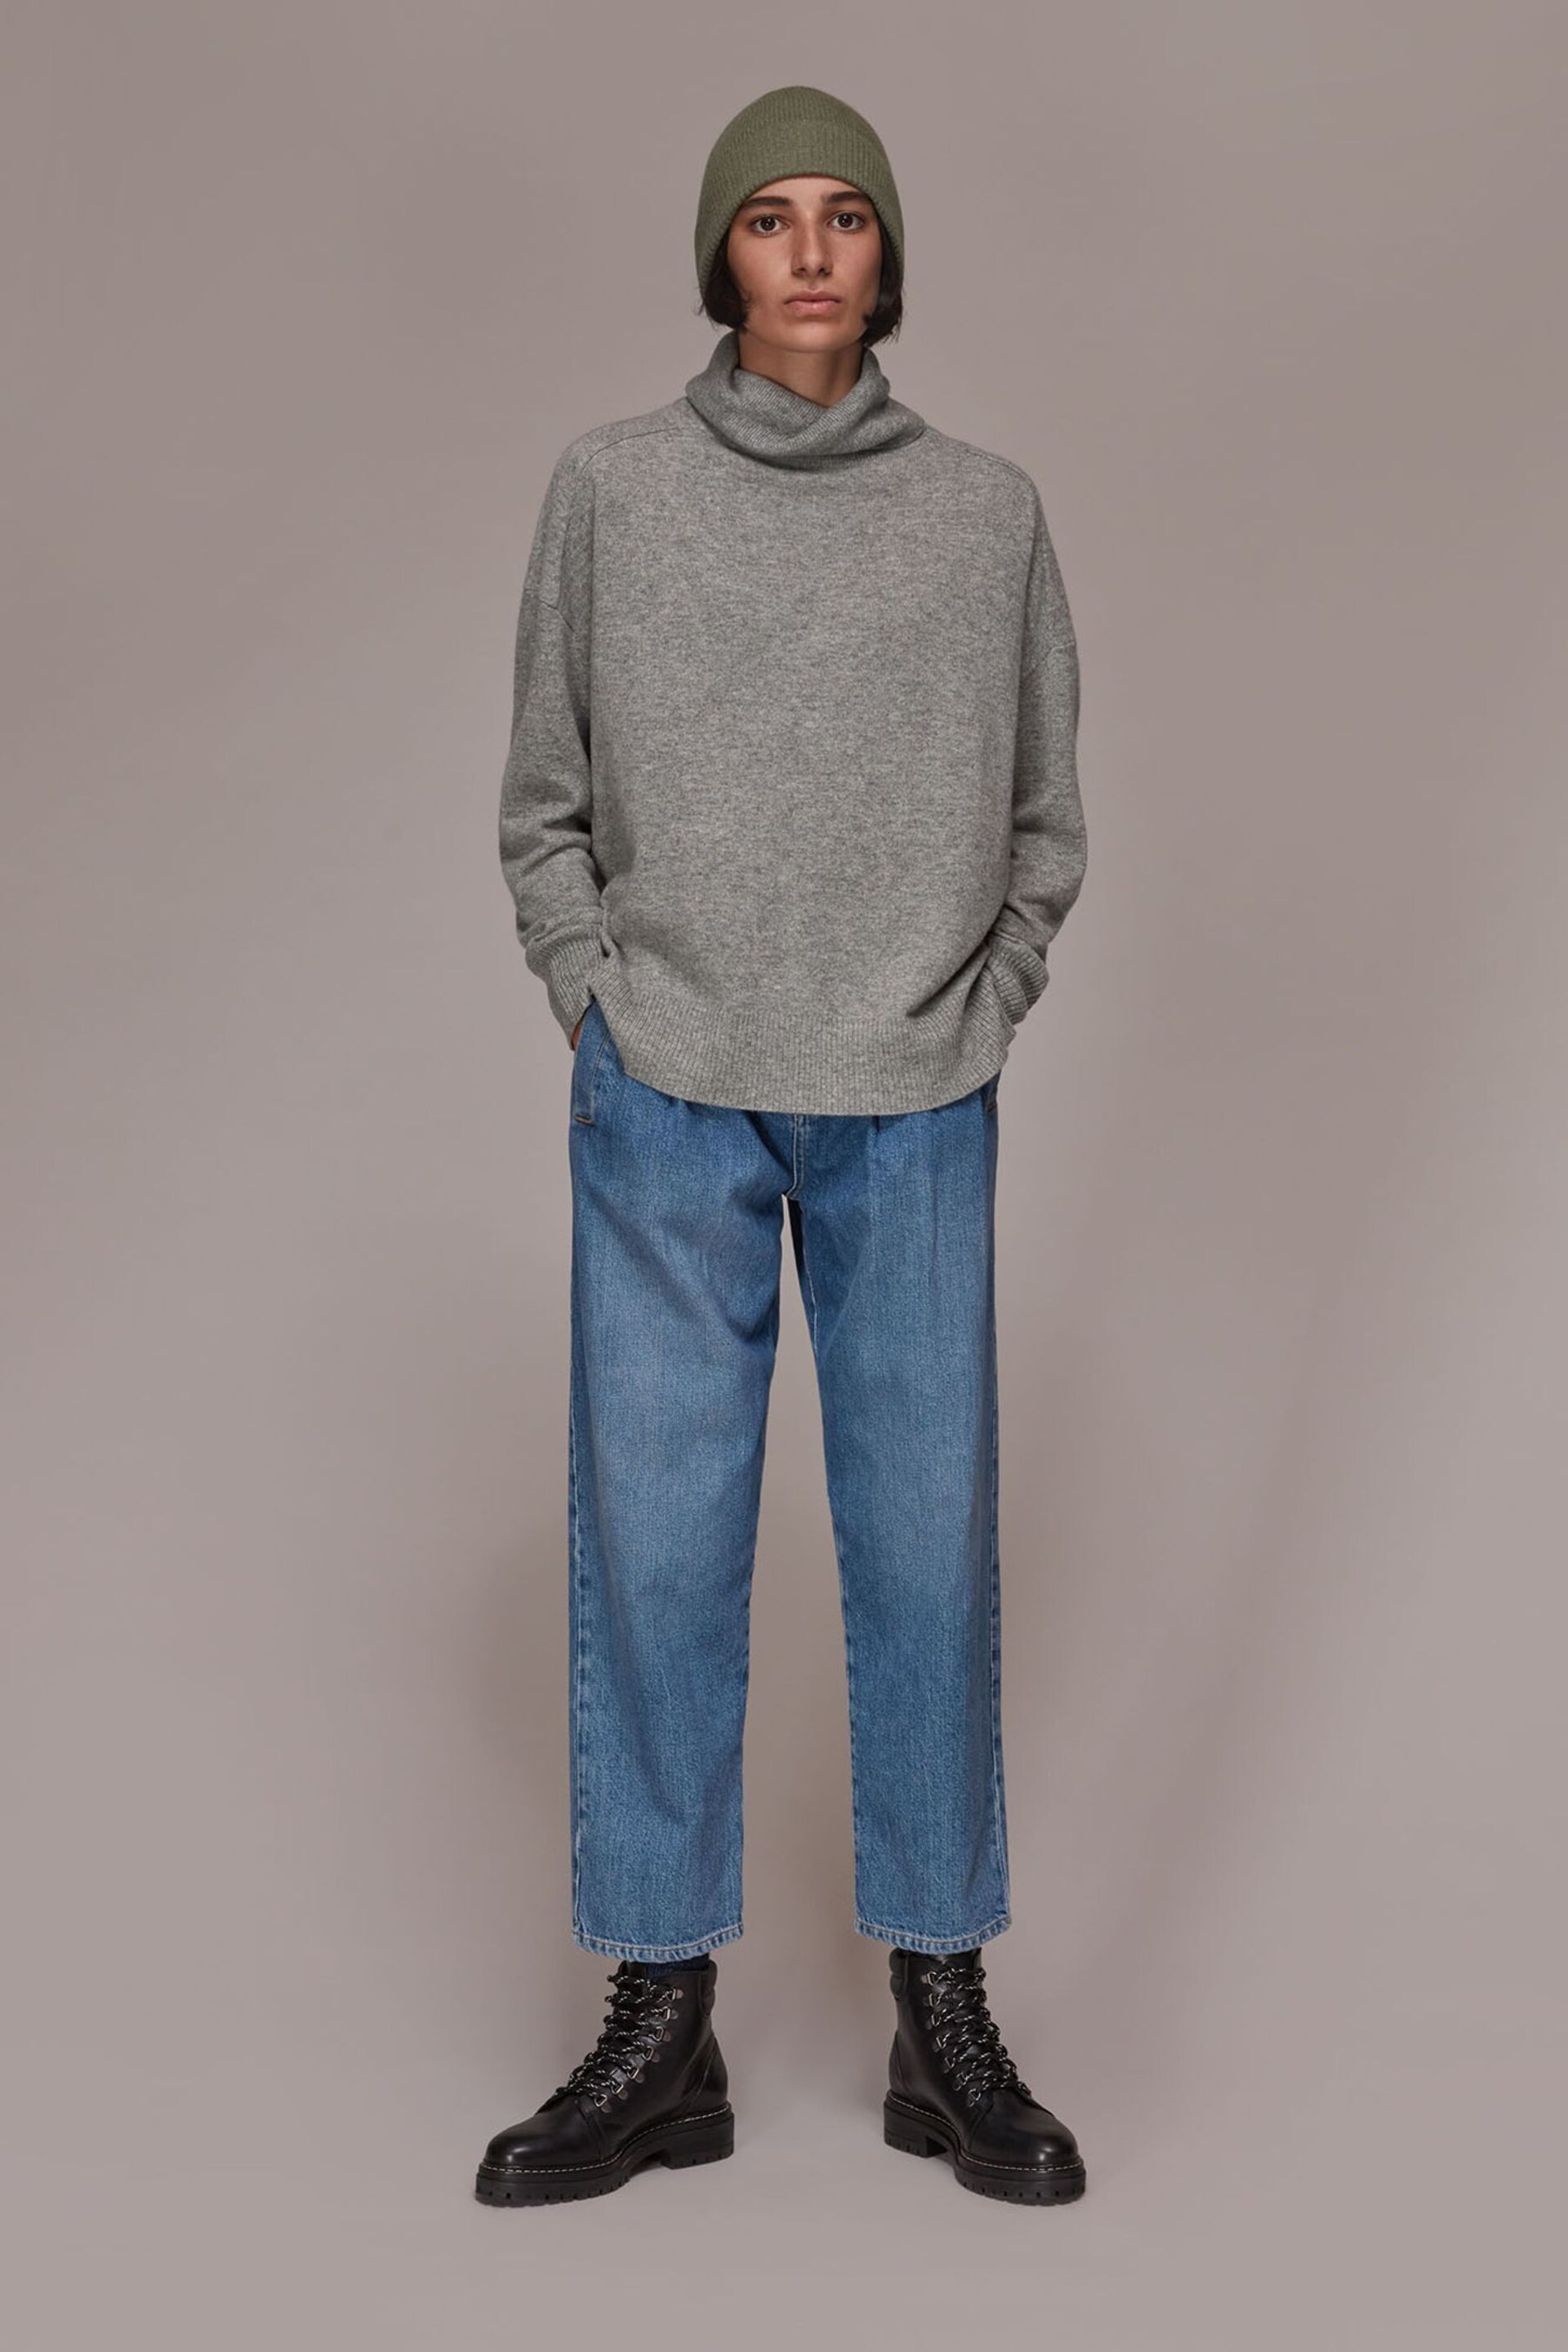 Whistles Cashmere Roll Neck Jumper - Image 1 of 5